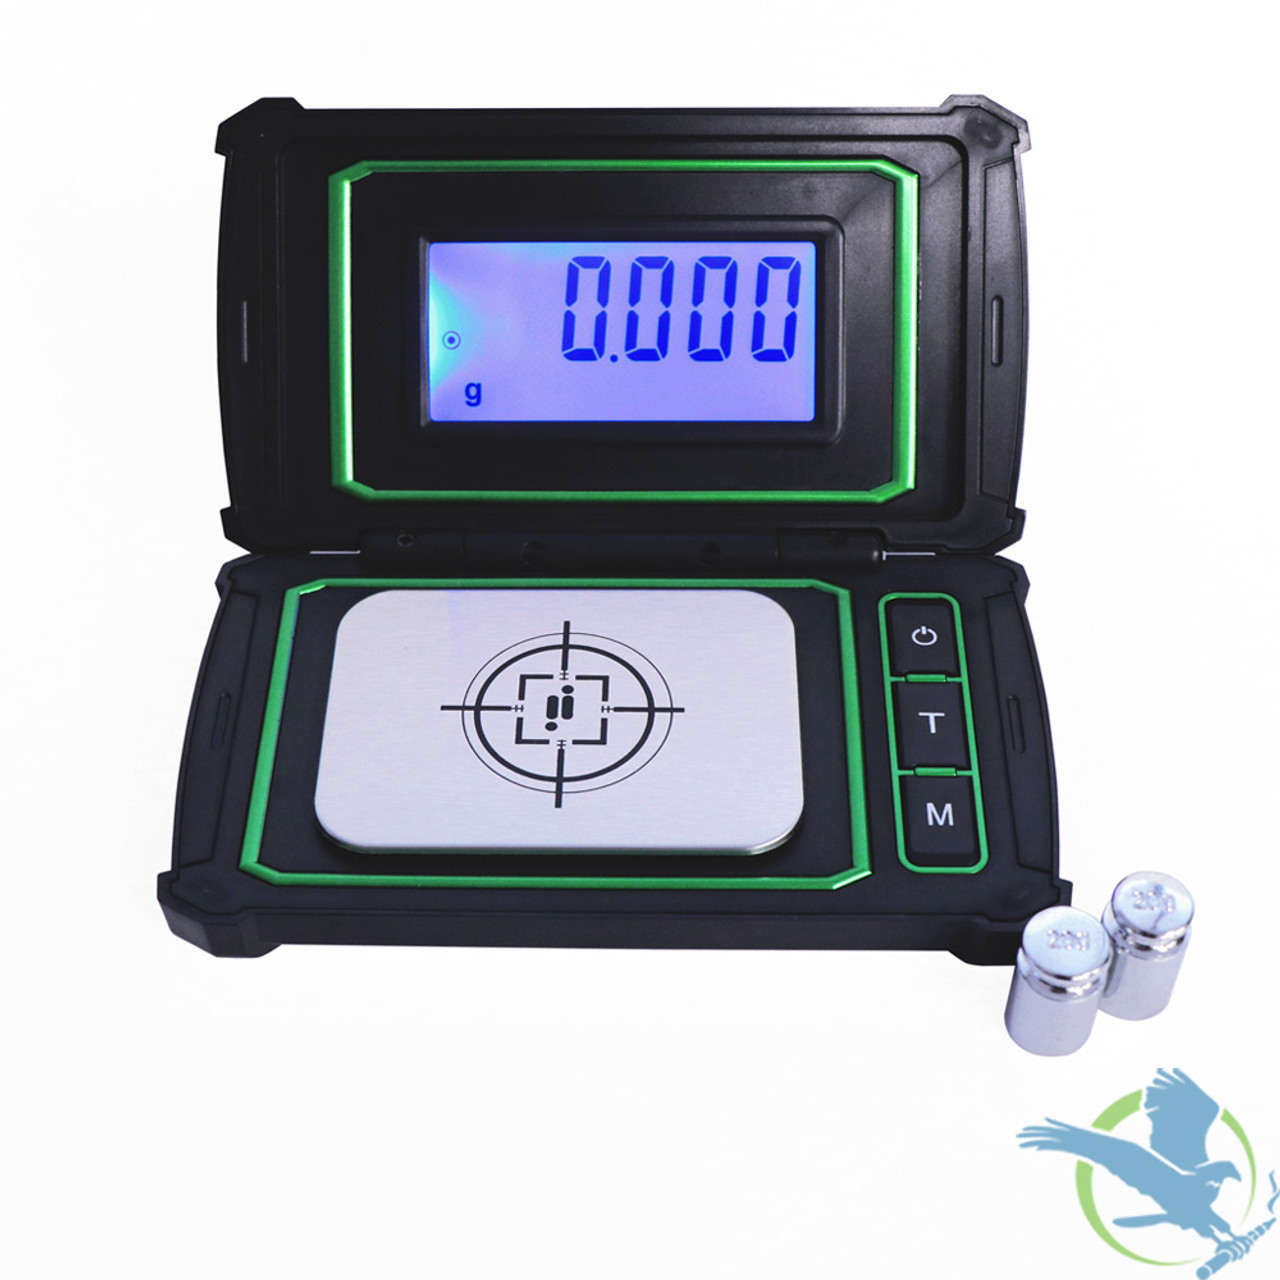 https://cdn11.bigcommerce.com/s-964anr/images/stencil/1280x1280/products/19585/96663/Infyniti-Scales-Prism-Professional-Digital-Scale-50g-x-0.001g-SC-PR50__76727.1640903751.jpg?c=2